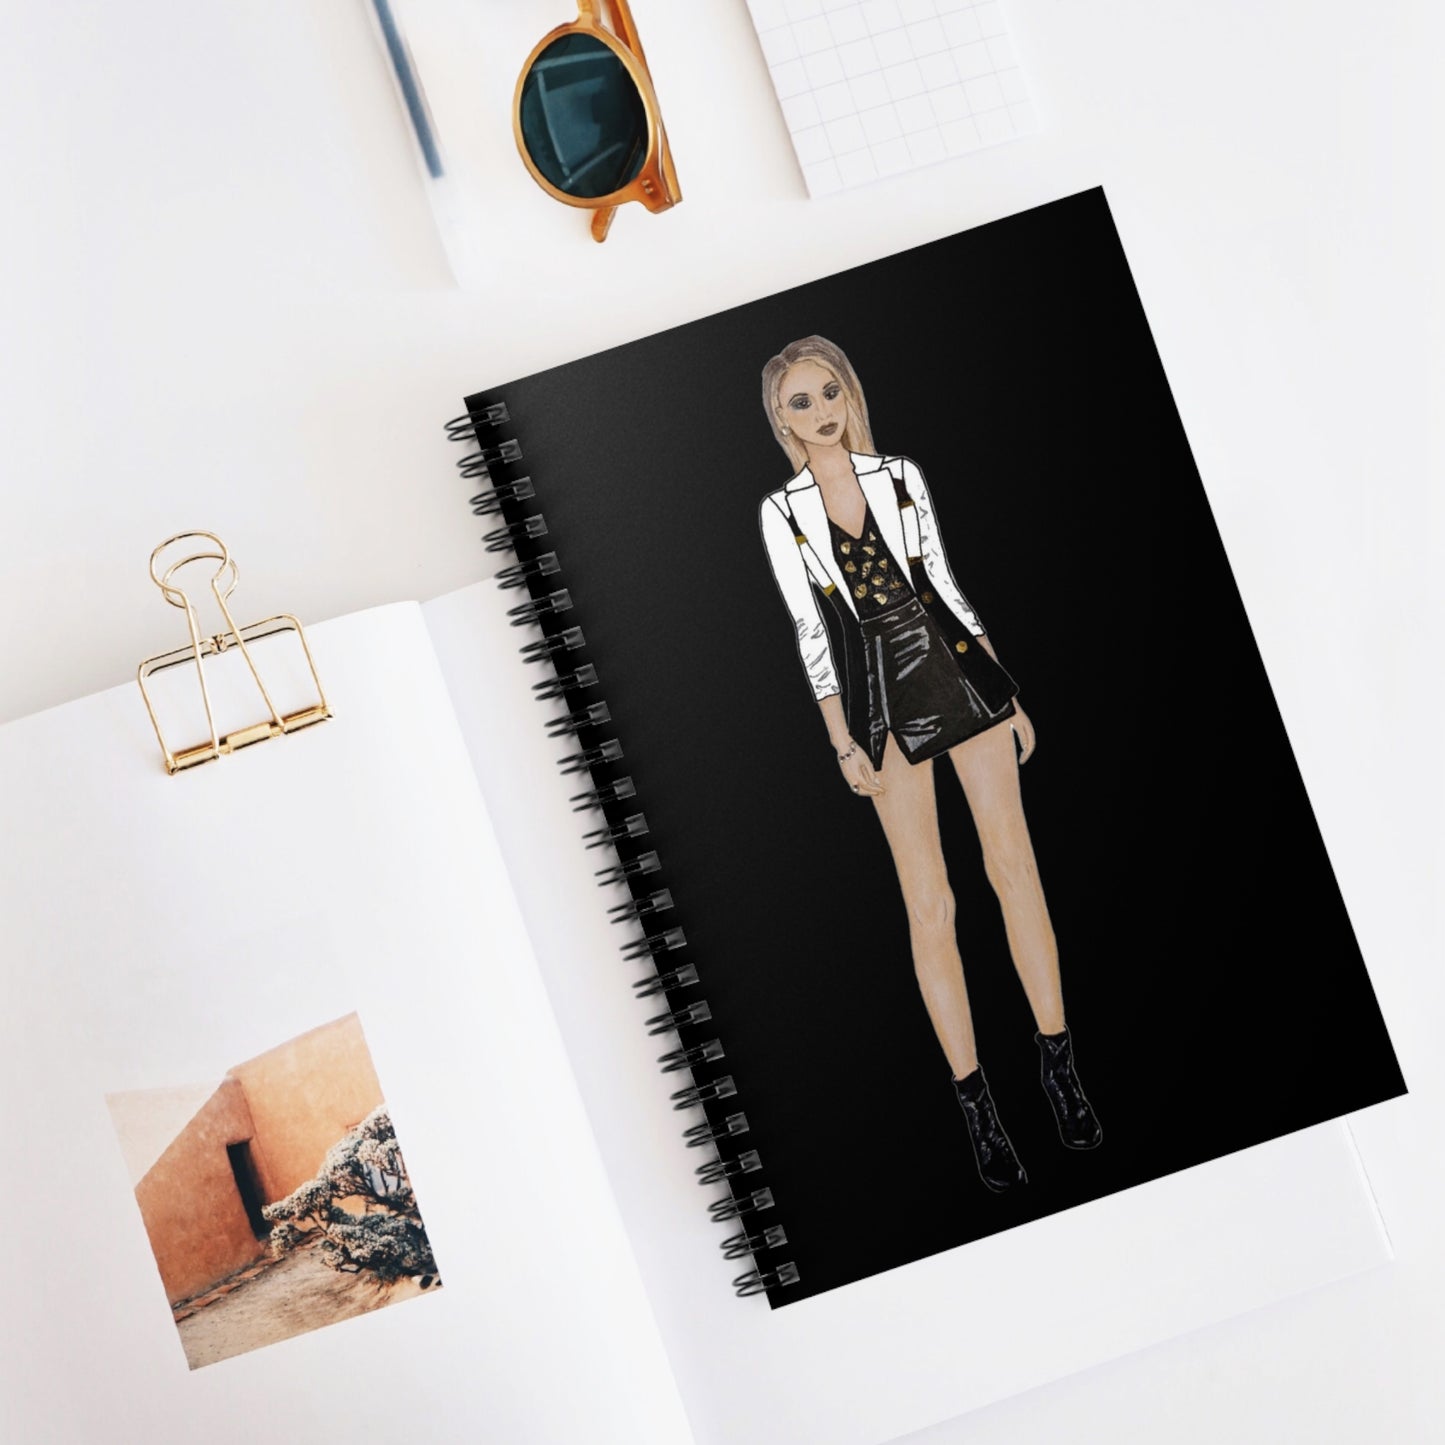 Fashion Spiral Notebook - Ruled Line